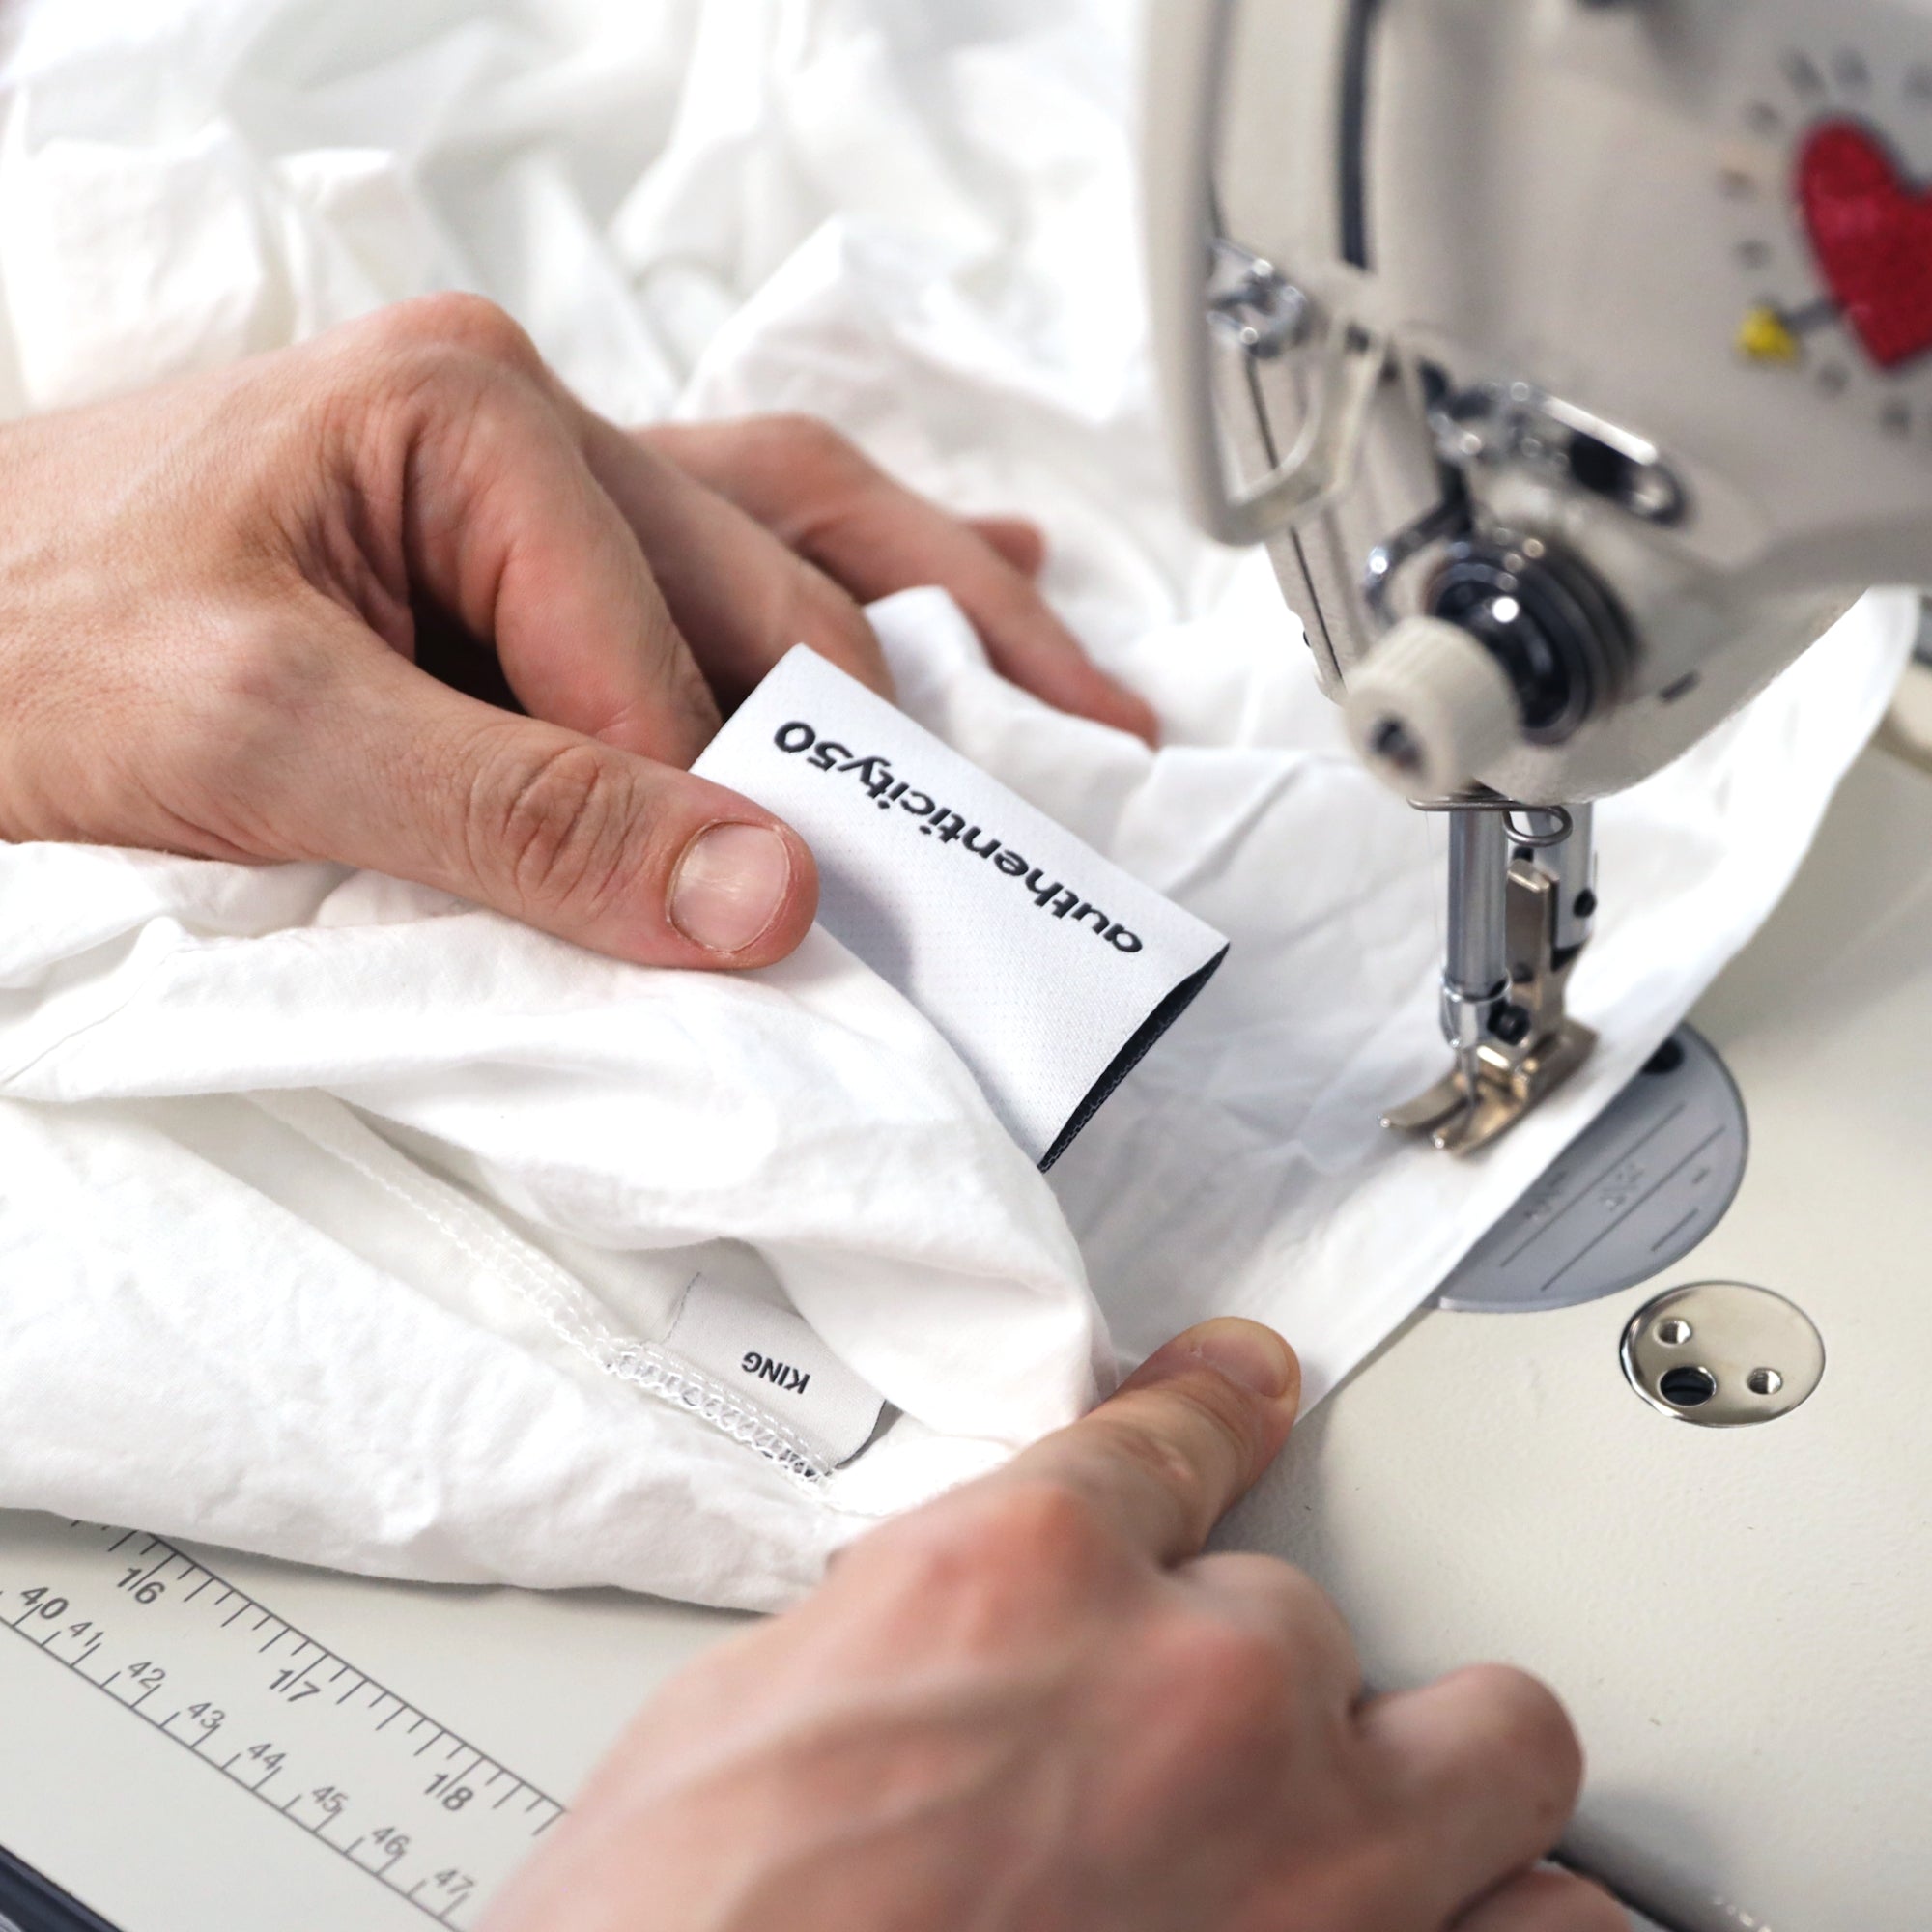 Stitching a new tag on sheets